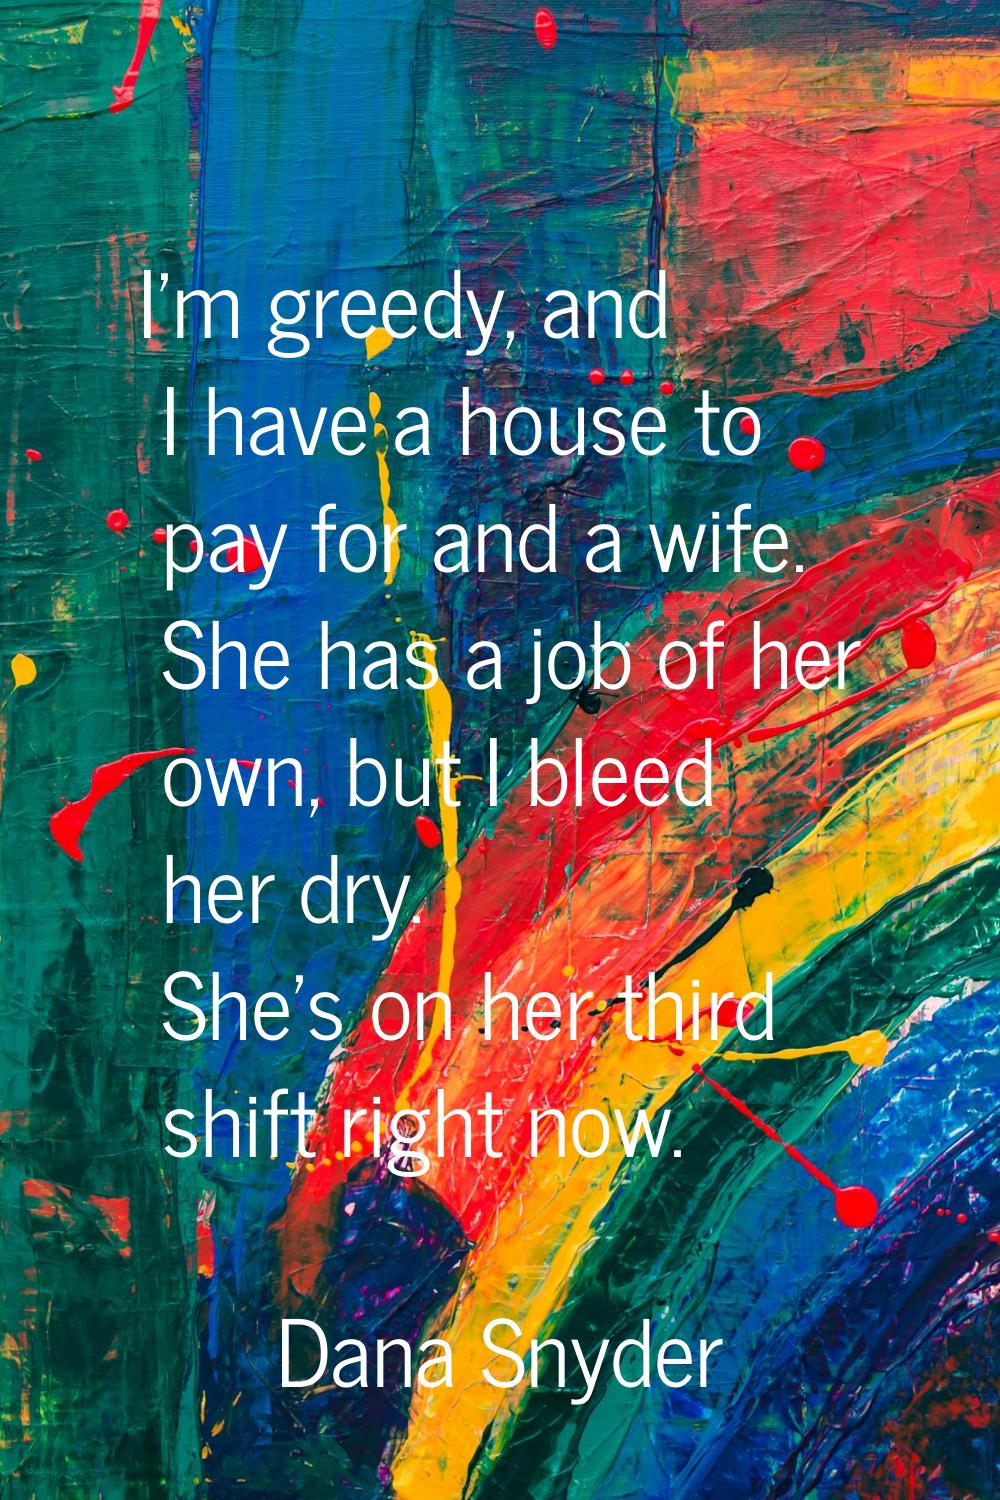 I'm greedy, and I have a house to pay for and a wife. She has a job of her own, but I bleed her dry